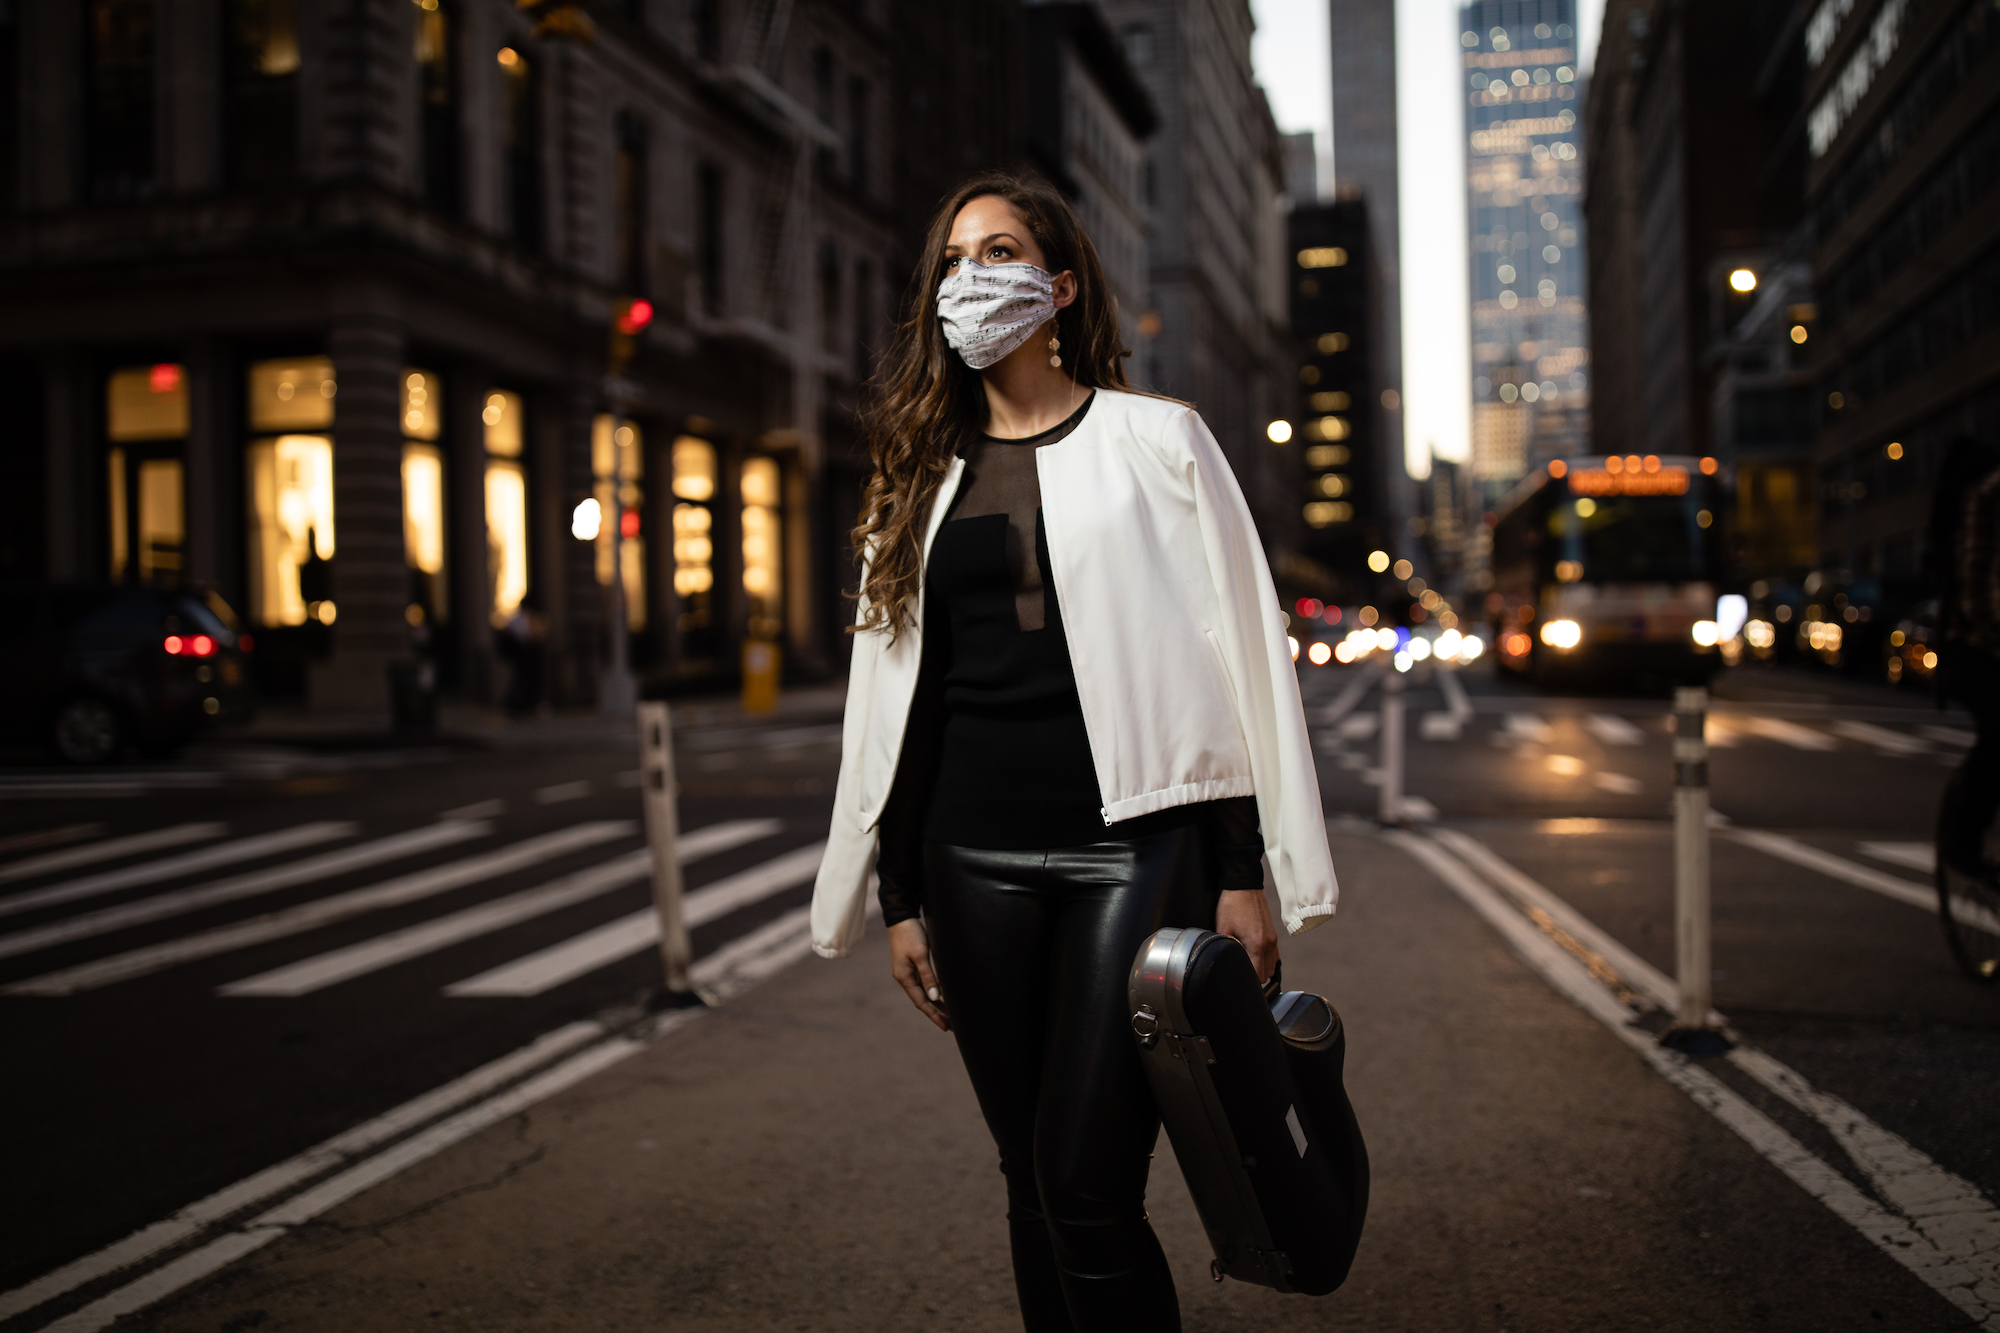 Alexa Tarantino wearing a mask, standing on a street corner in NYC, holding her saxophone case